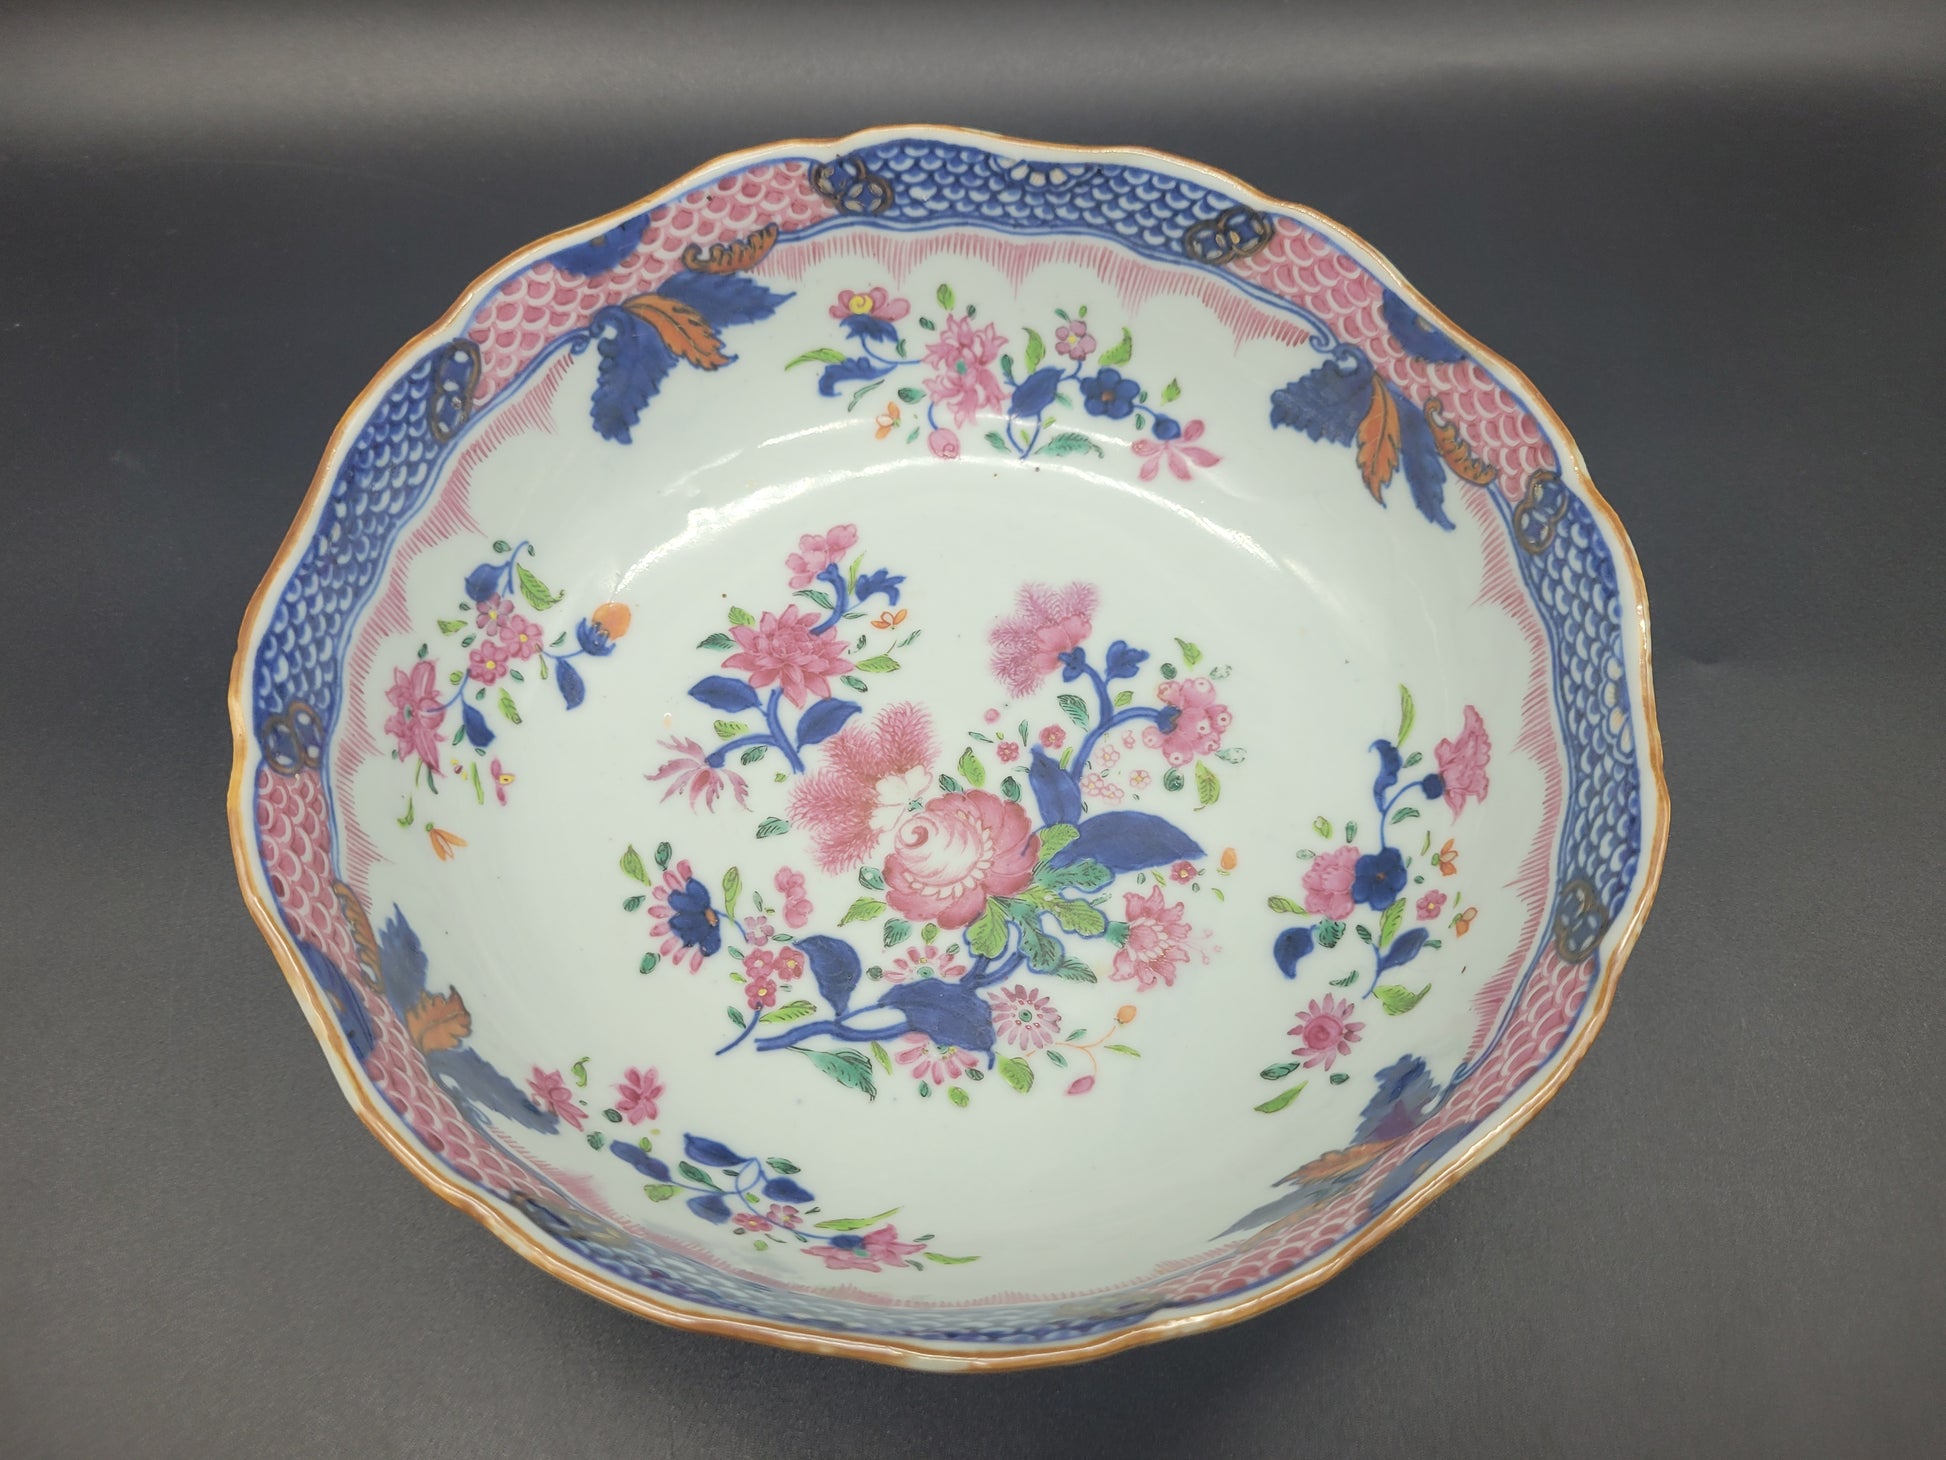 Antiques online Beautiful Extremely well decorated Chinese 18th / 19th Century Famille Rose Export Bowl